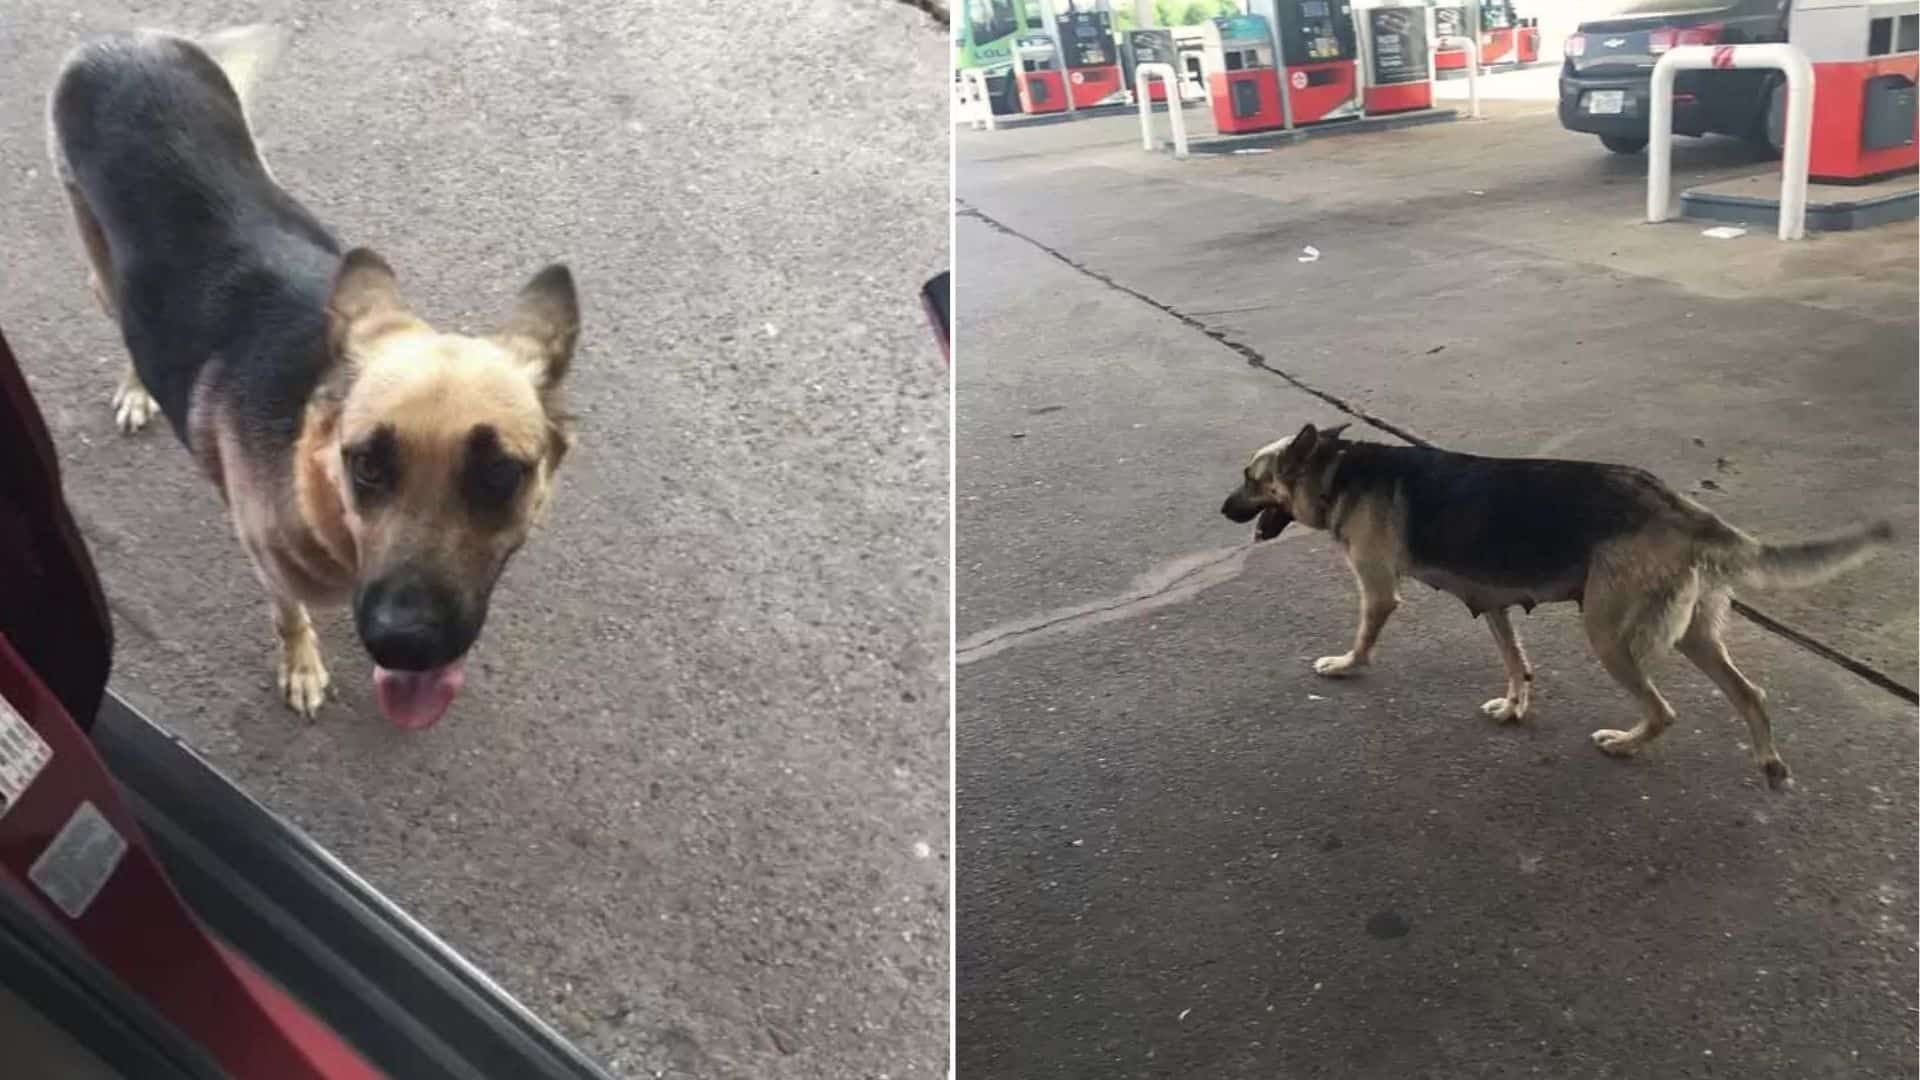 Heartbroken Dog Mom Dumped At The Gas Station Begs People For Help